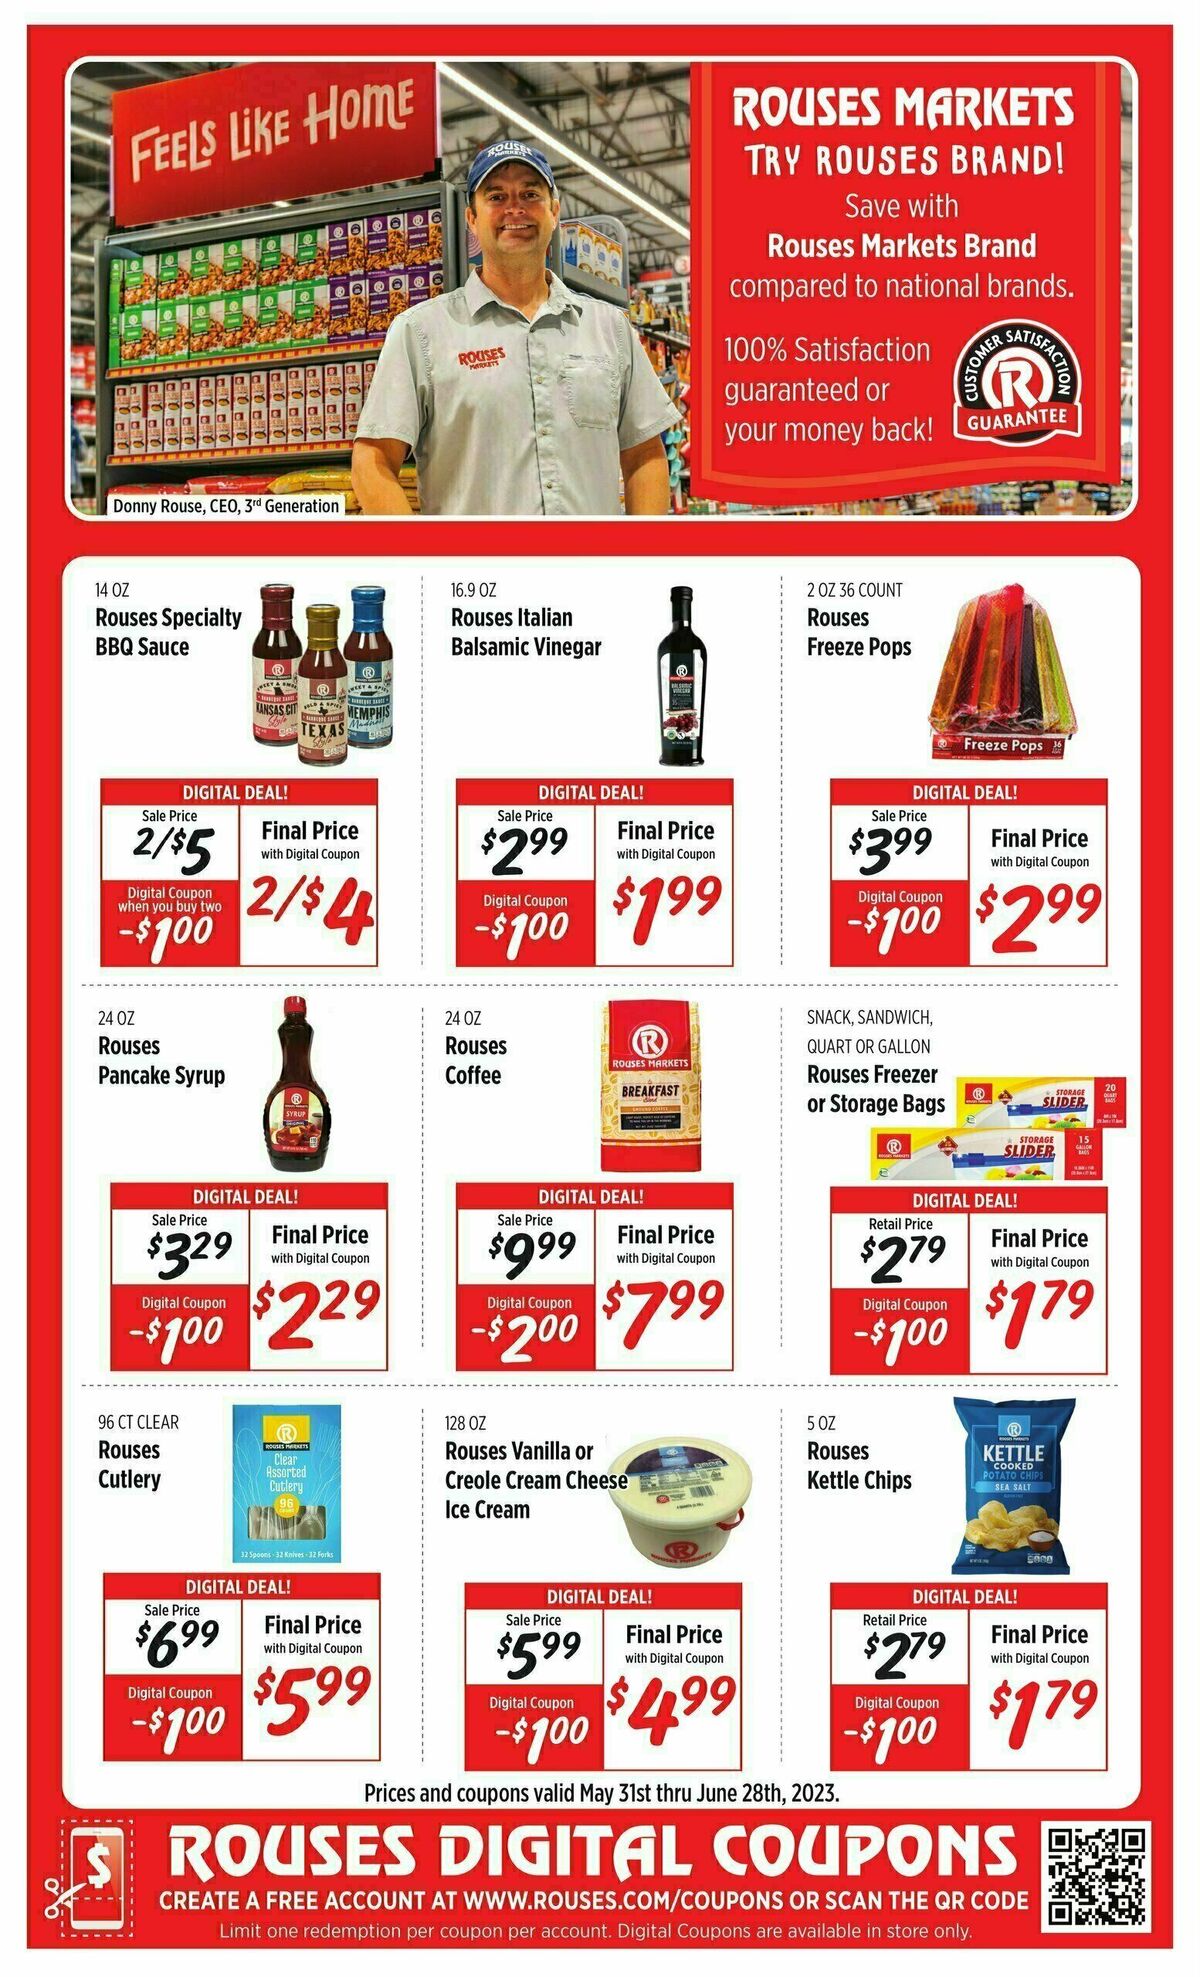 Rouses Markets Digital Coupons Weekly Ad from May 31